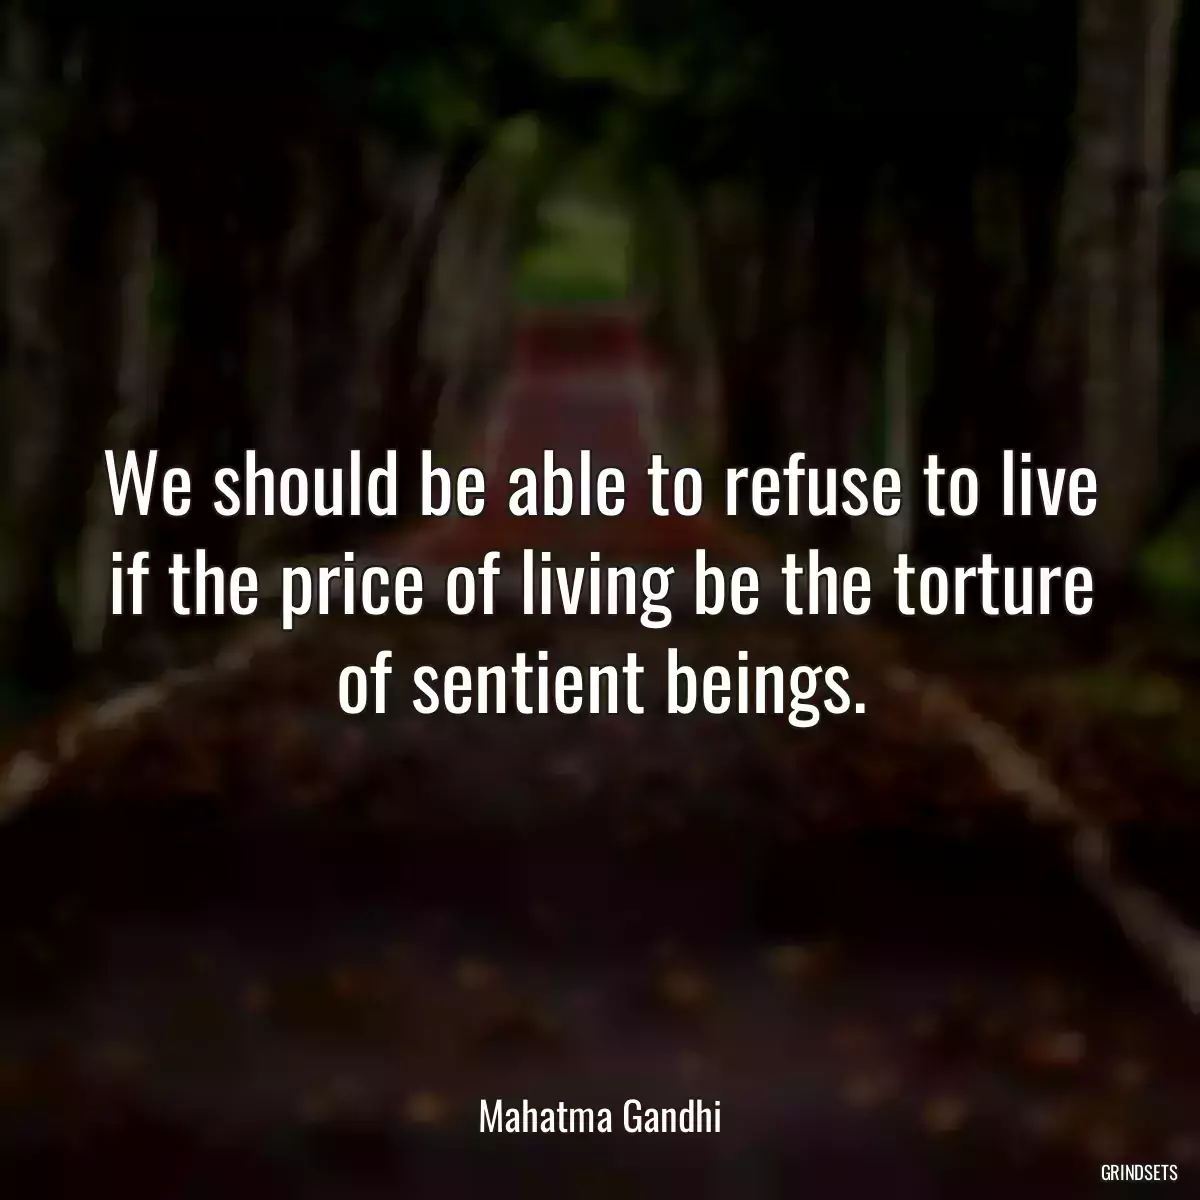 We should be able to refuse to live if the price of living be the torture of sentient beings.